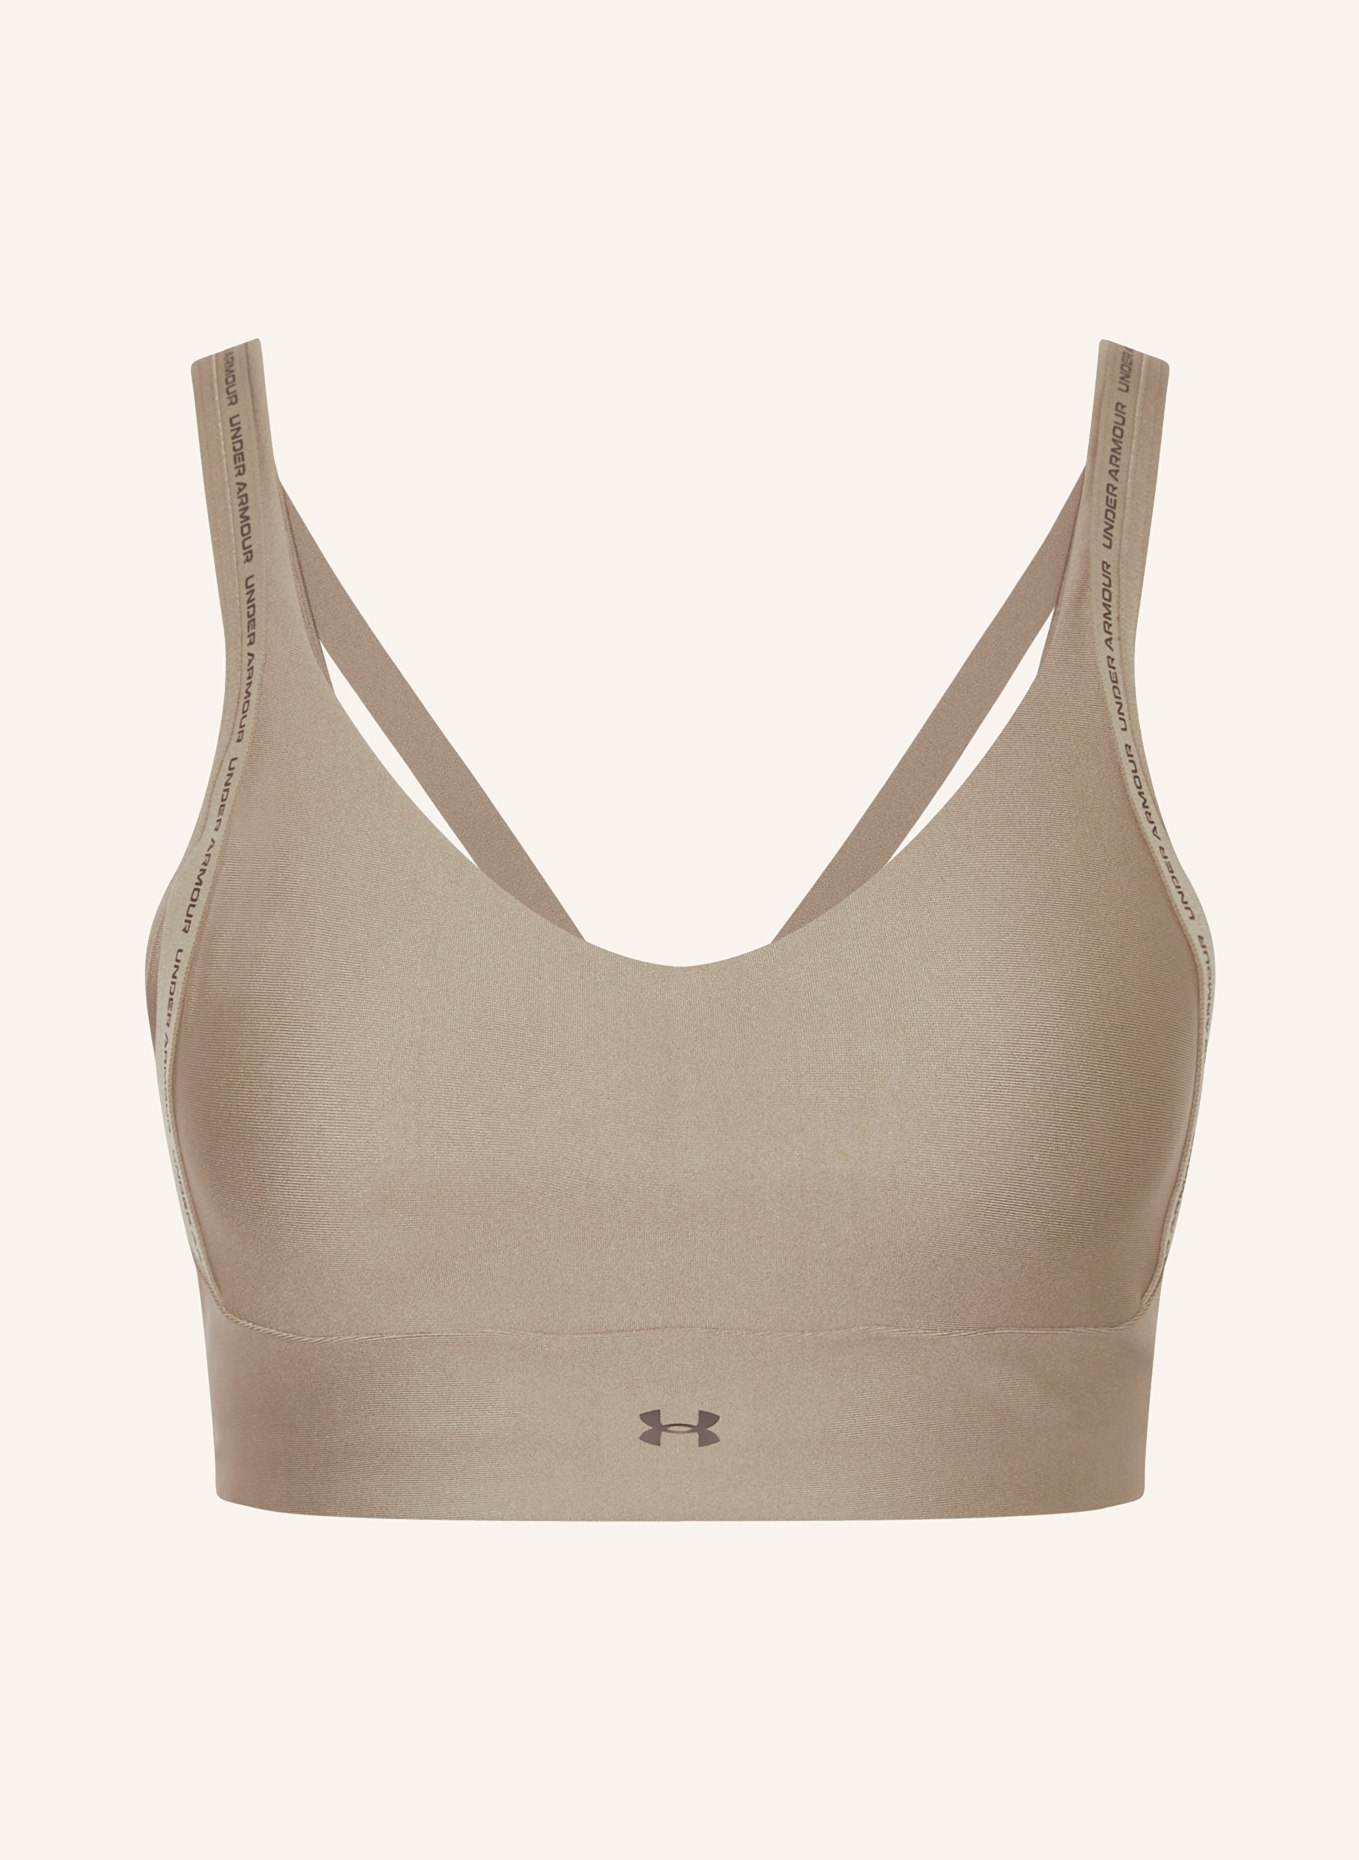 UNDER ARMOUR Sport-BH INFINITY 2.0, Farbe: TAUPE (Bild 1)